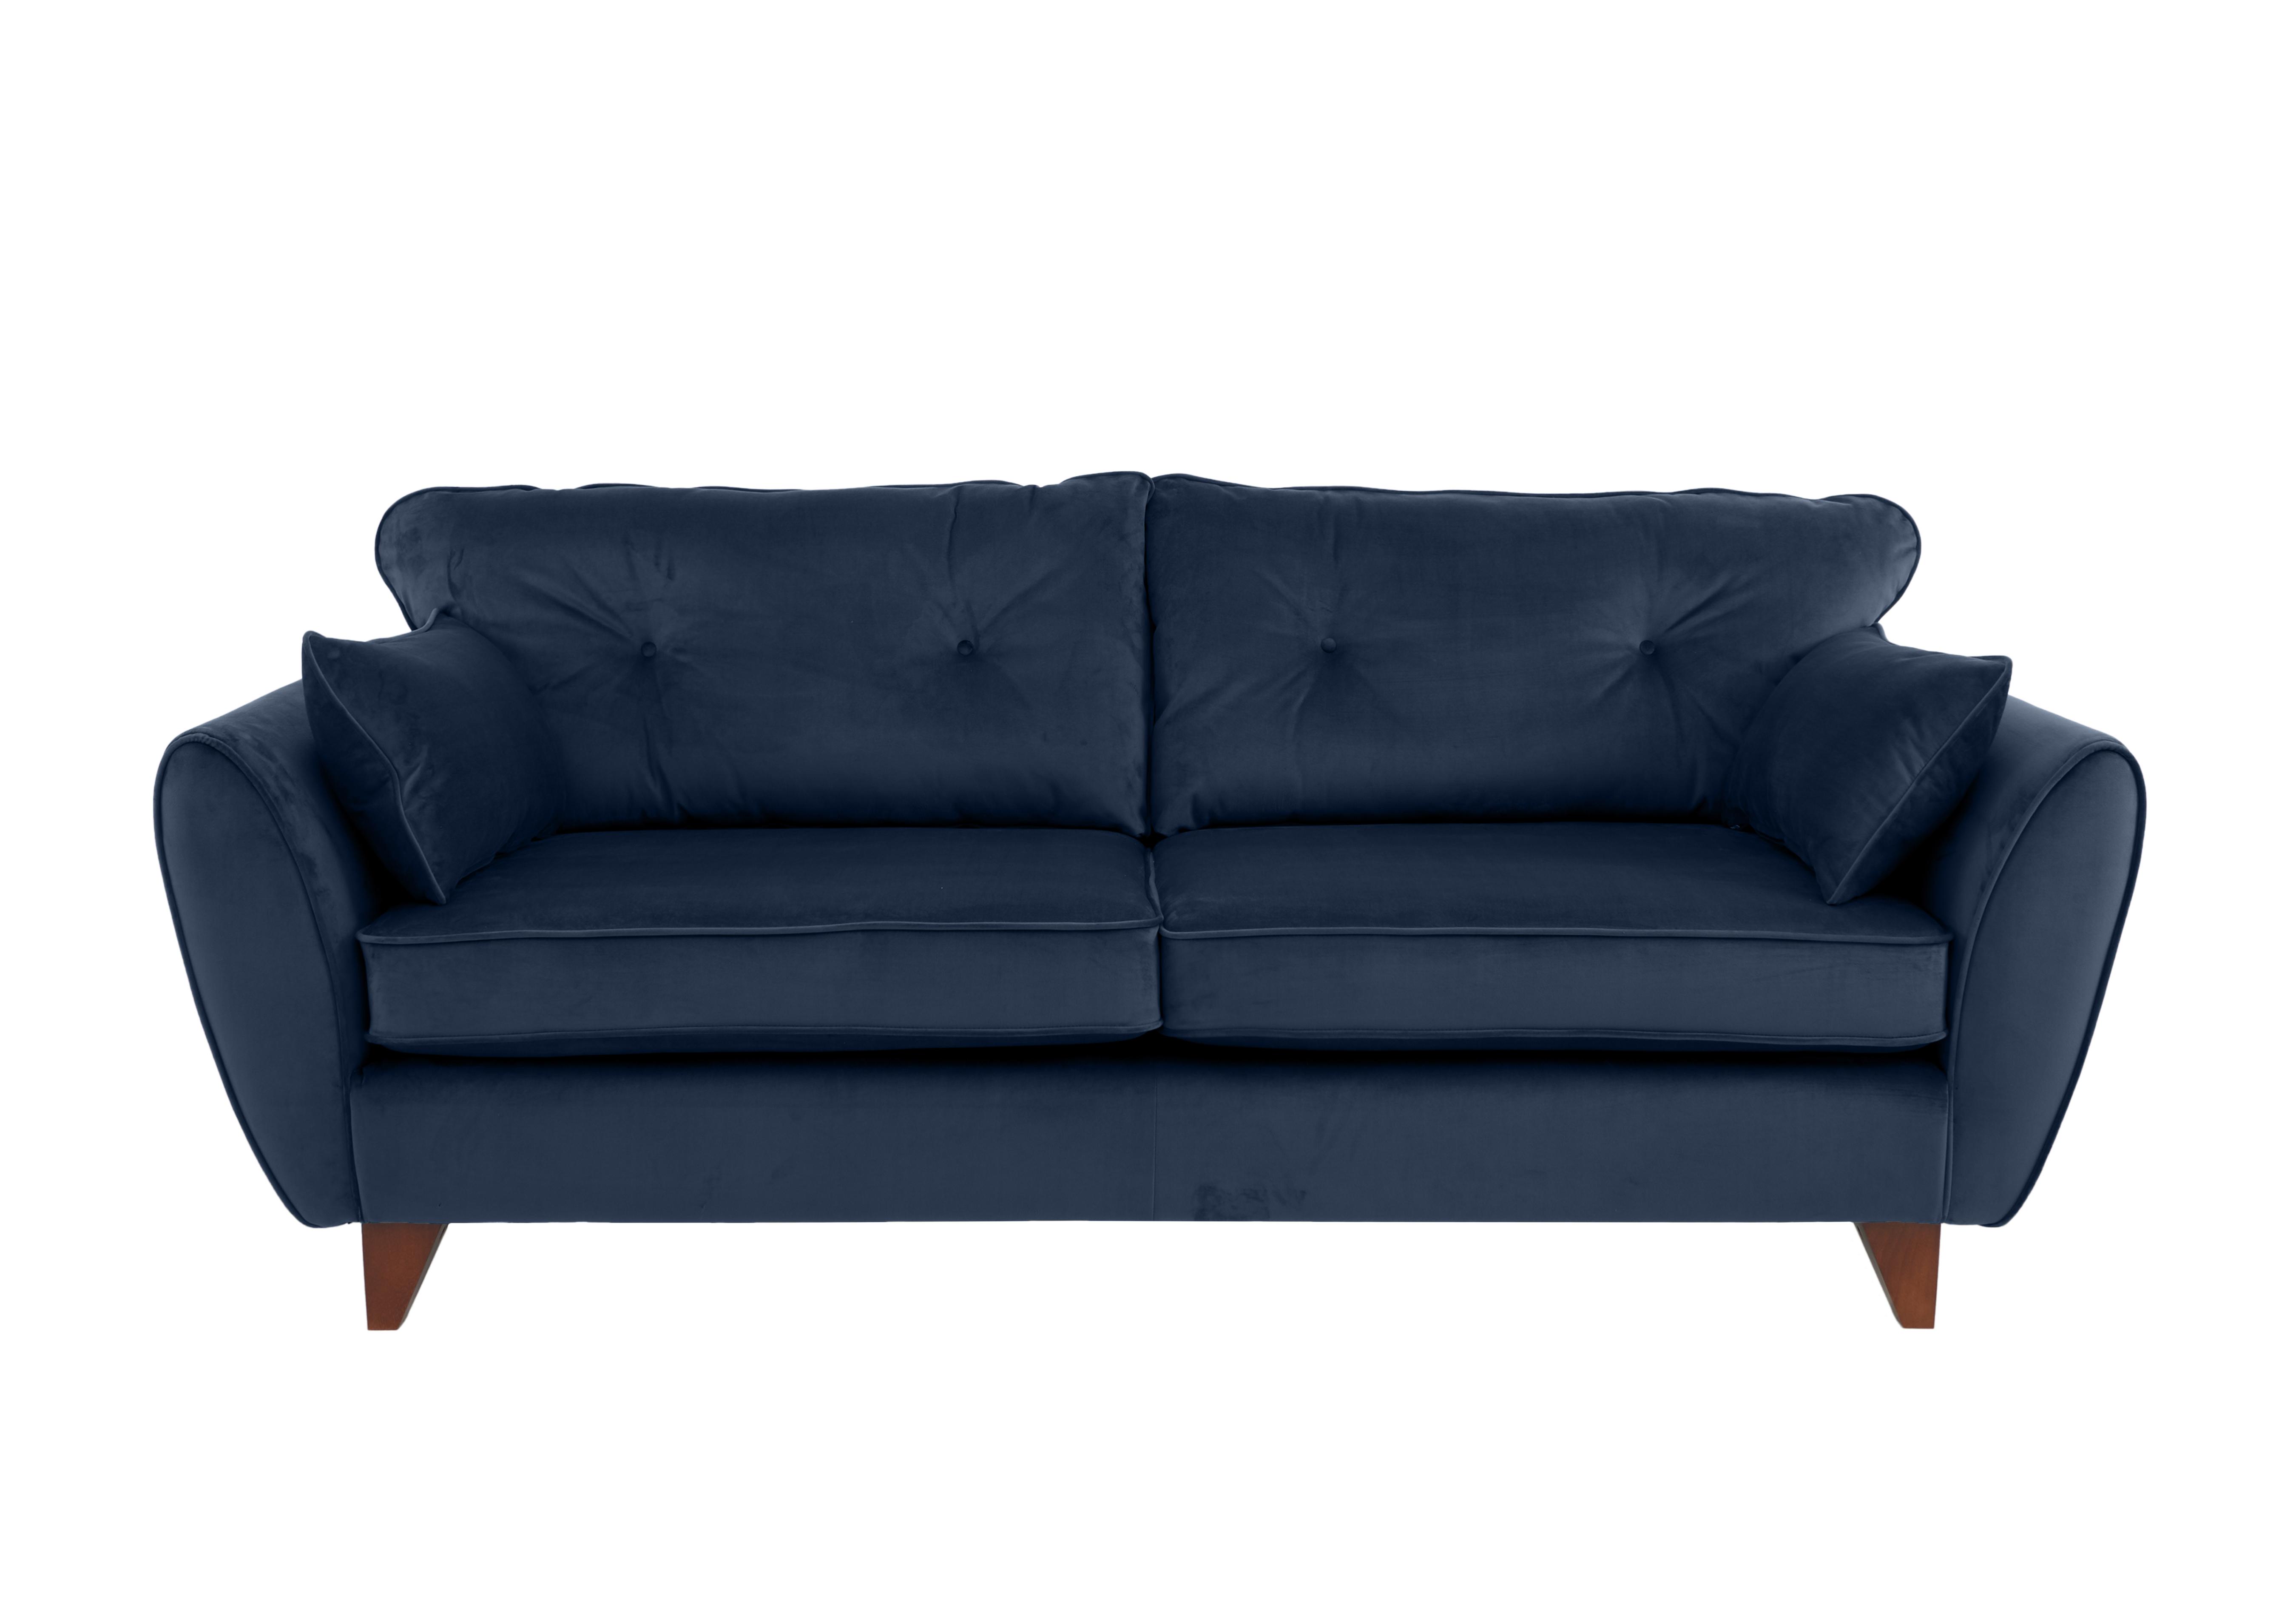 Felix 4 Seater Fabric Sofa in Navy on Furniture Village